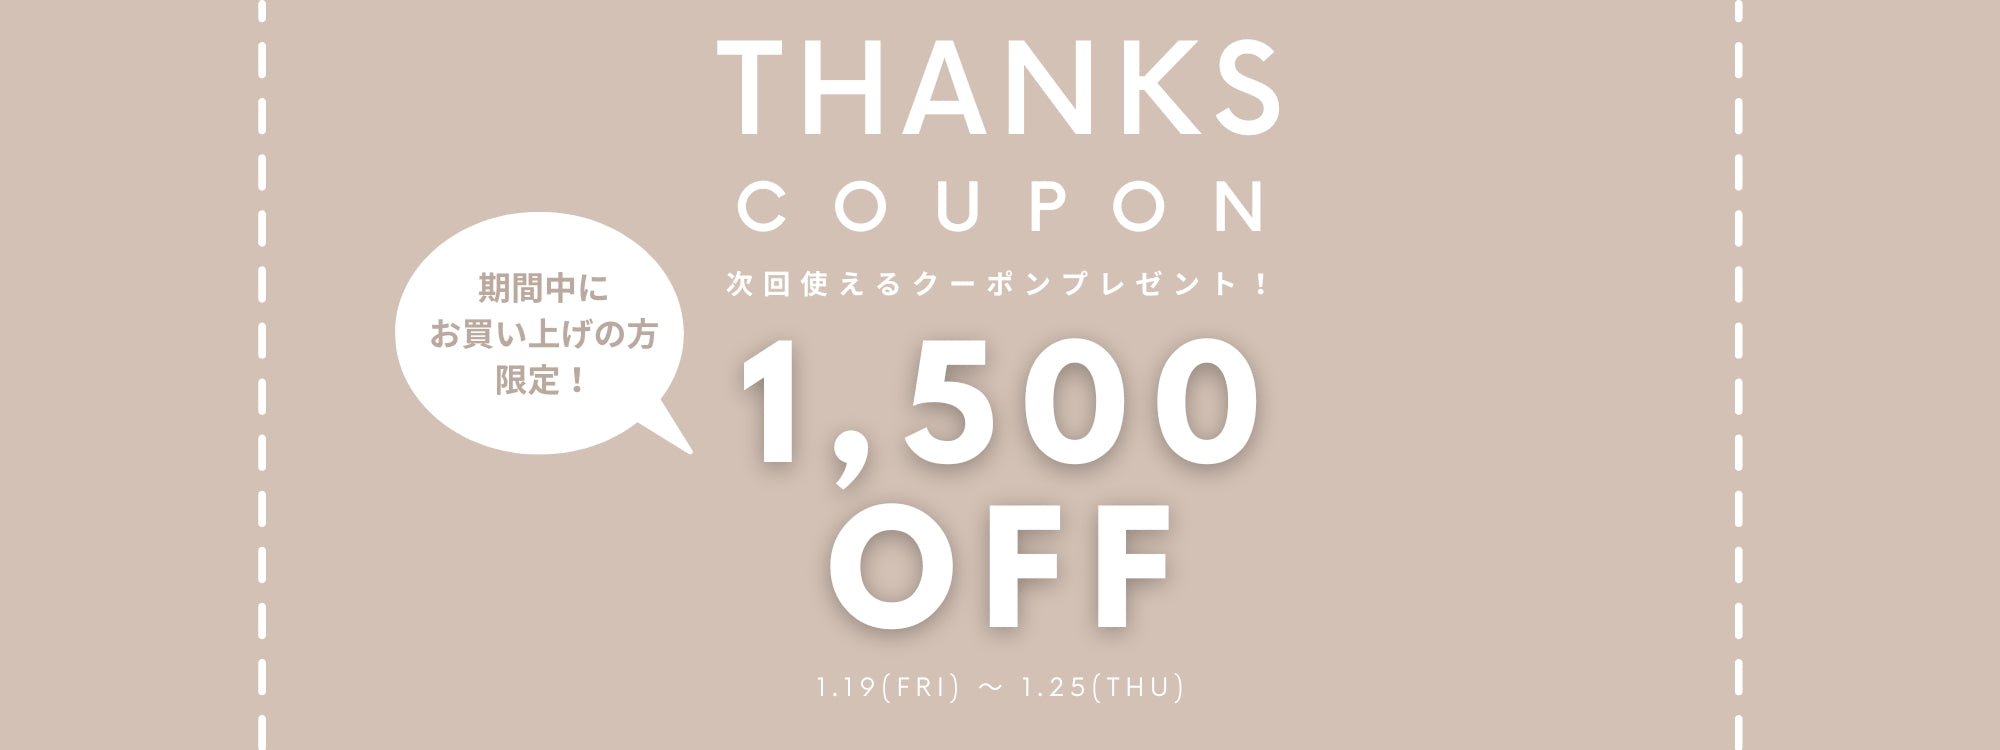 THANKS COUPON CAMPAIGN